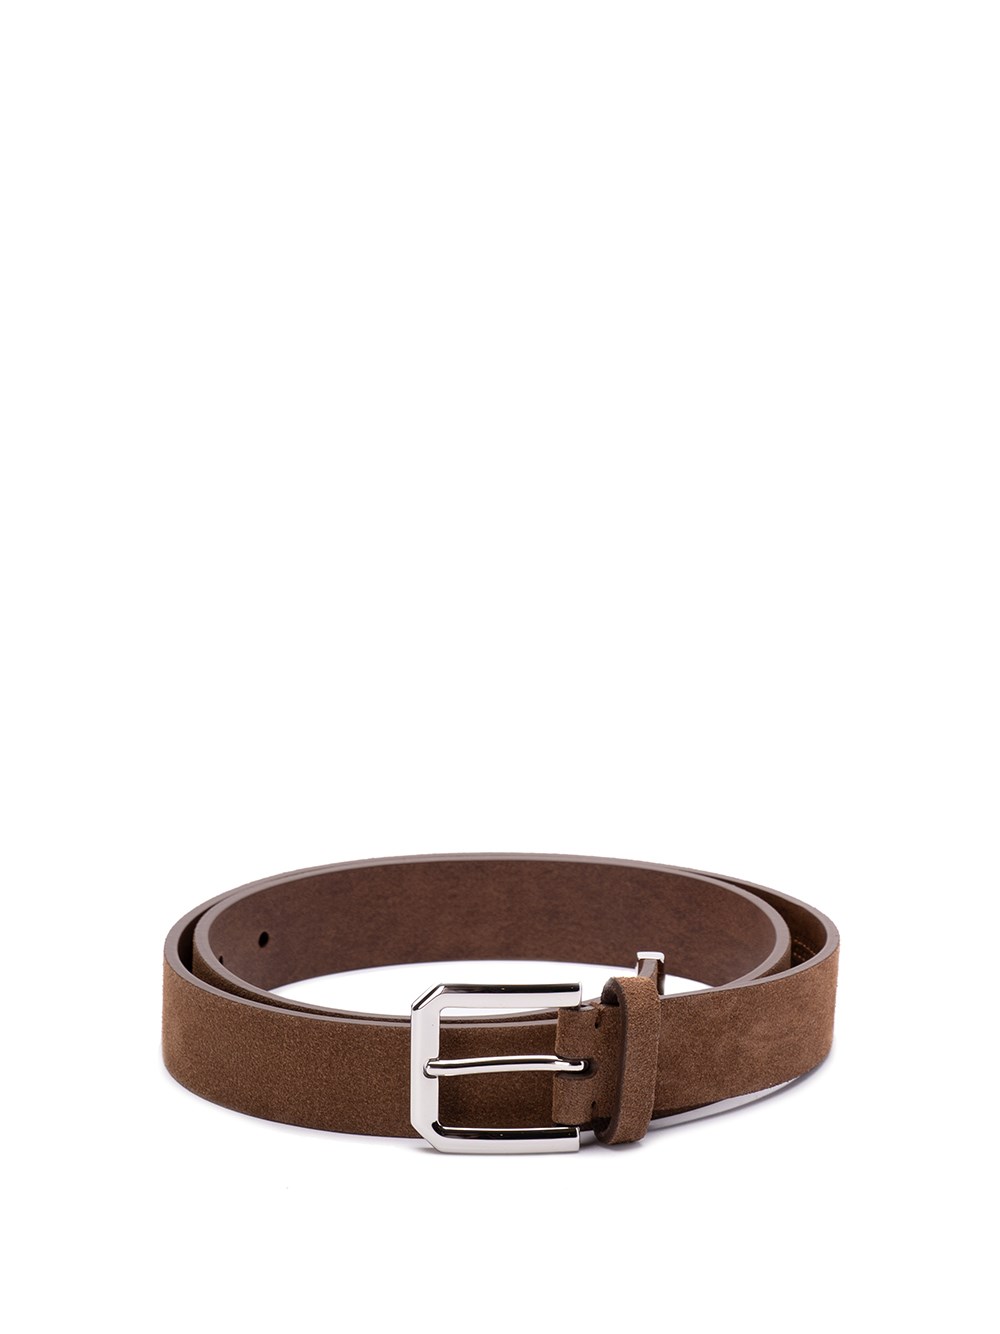 Brunello Cucinelli Belt With Square Buckle And Tip In Brown